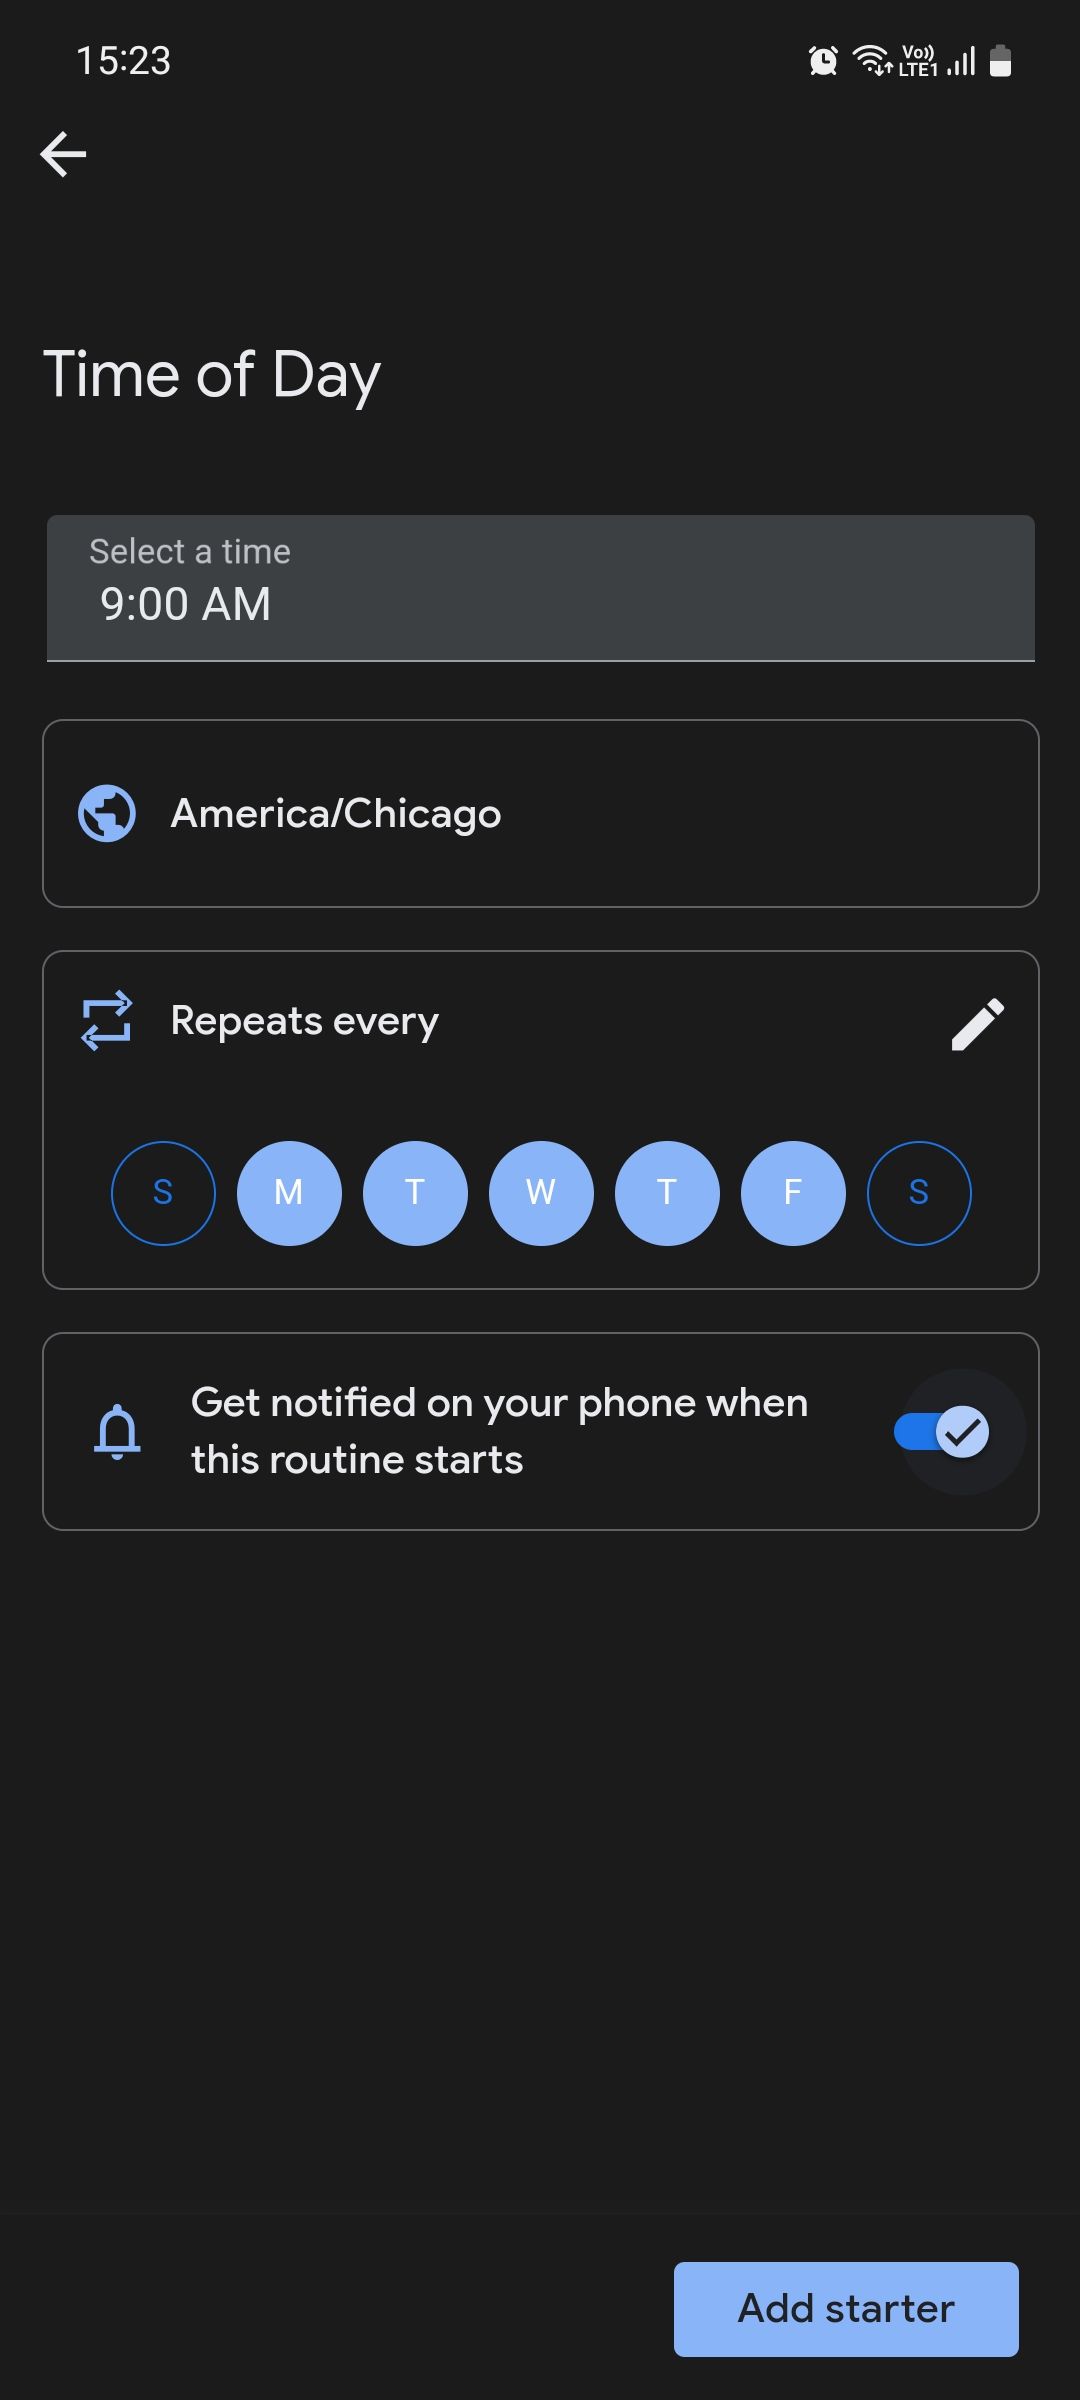 Google Assistant Routines time-based routine activation